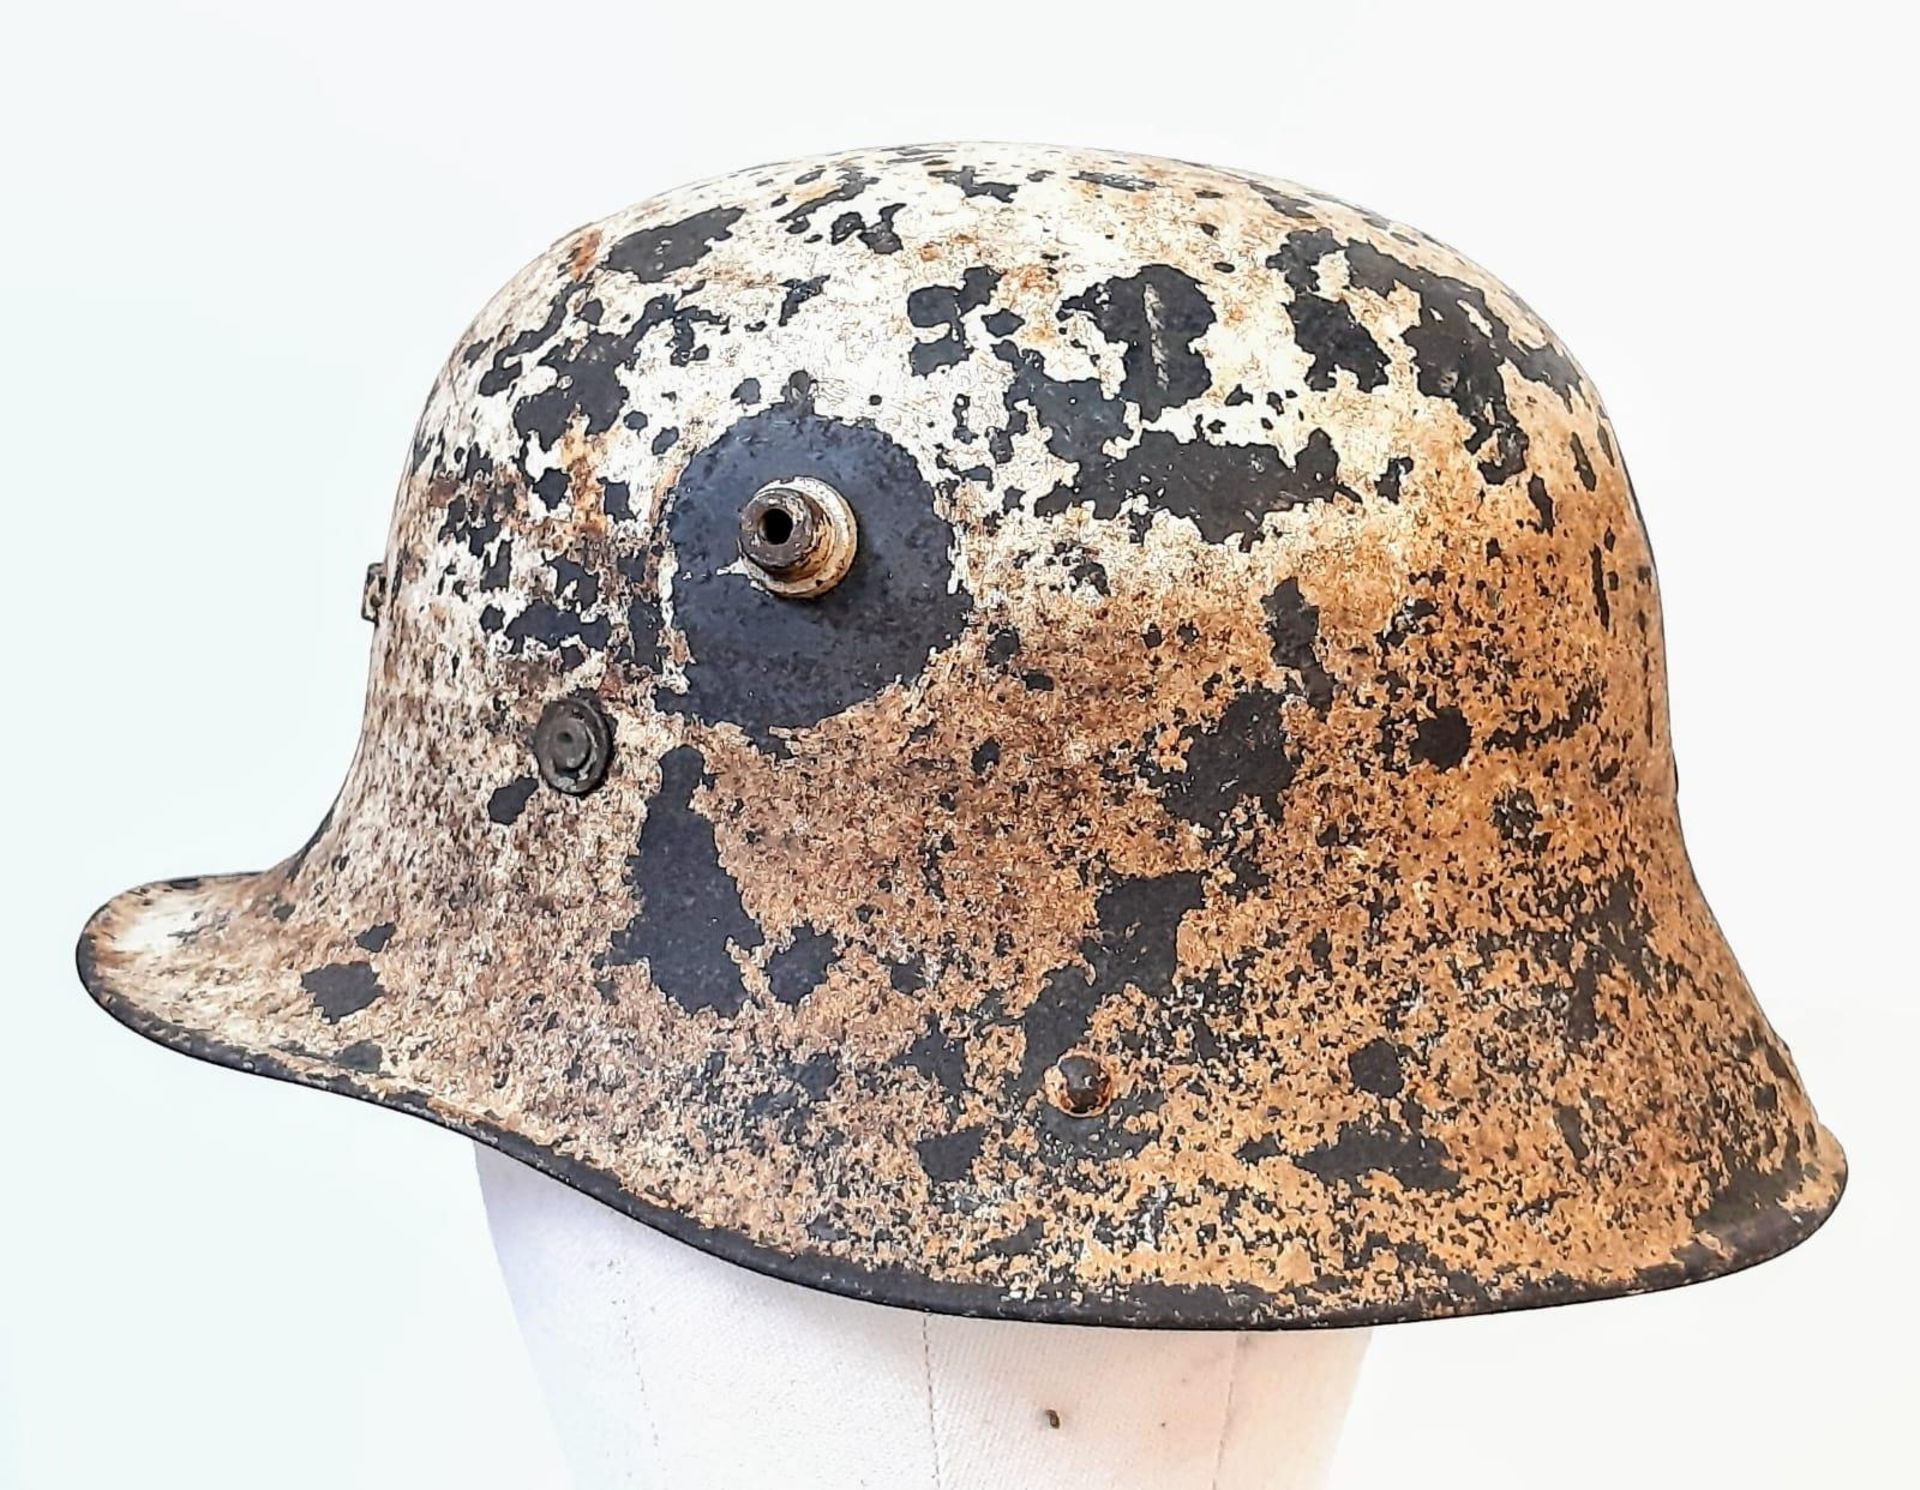 Scarce M27 Irish Army Helmet. These were based on the German M16, made by the Vickers Machine Gun